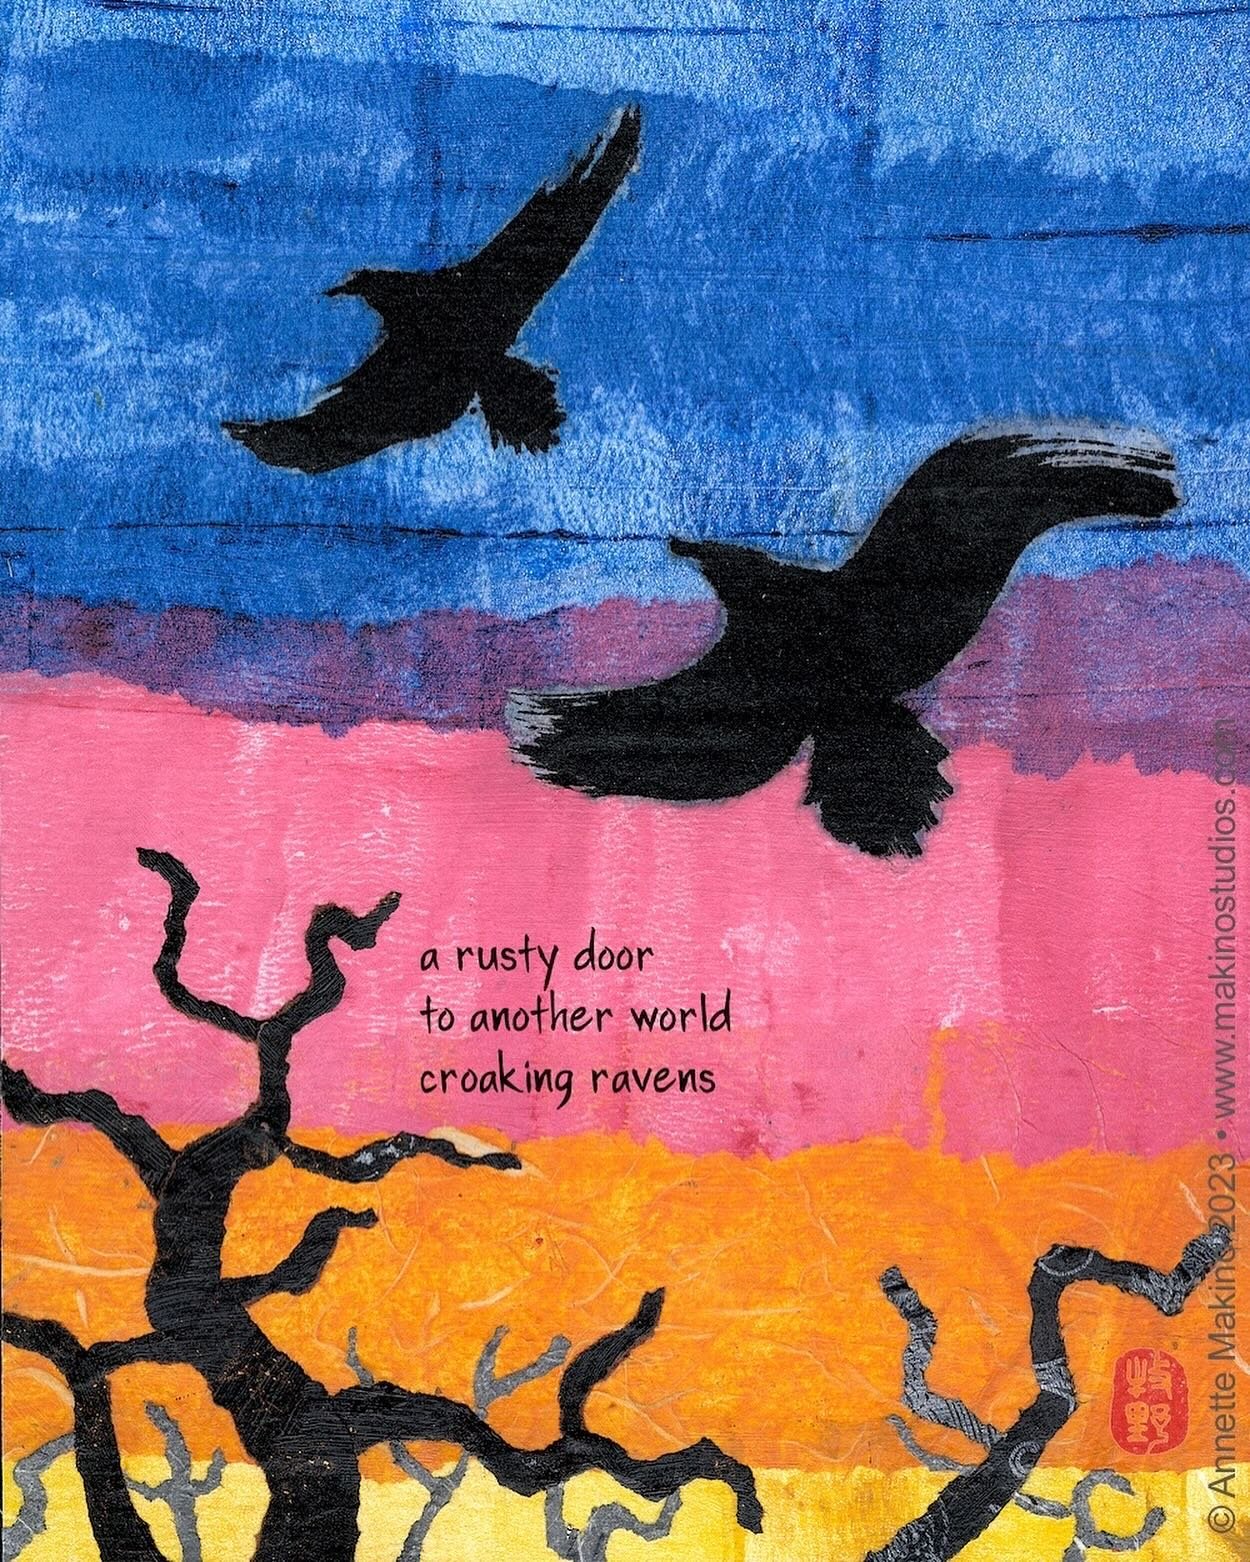 Happy International Haiku Poetry Day! Here&rsquo;s a haiga (art combined with haiku) with a Southwestern feel. Have you ever noticed how raven calls sound like rusty hinges?
⠀⠀⠀⠀⠀⠀⠀⠀⠀
Just saw a pair today soaring from their roost high in a clifftop&